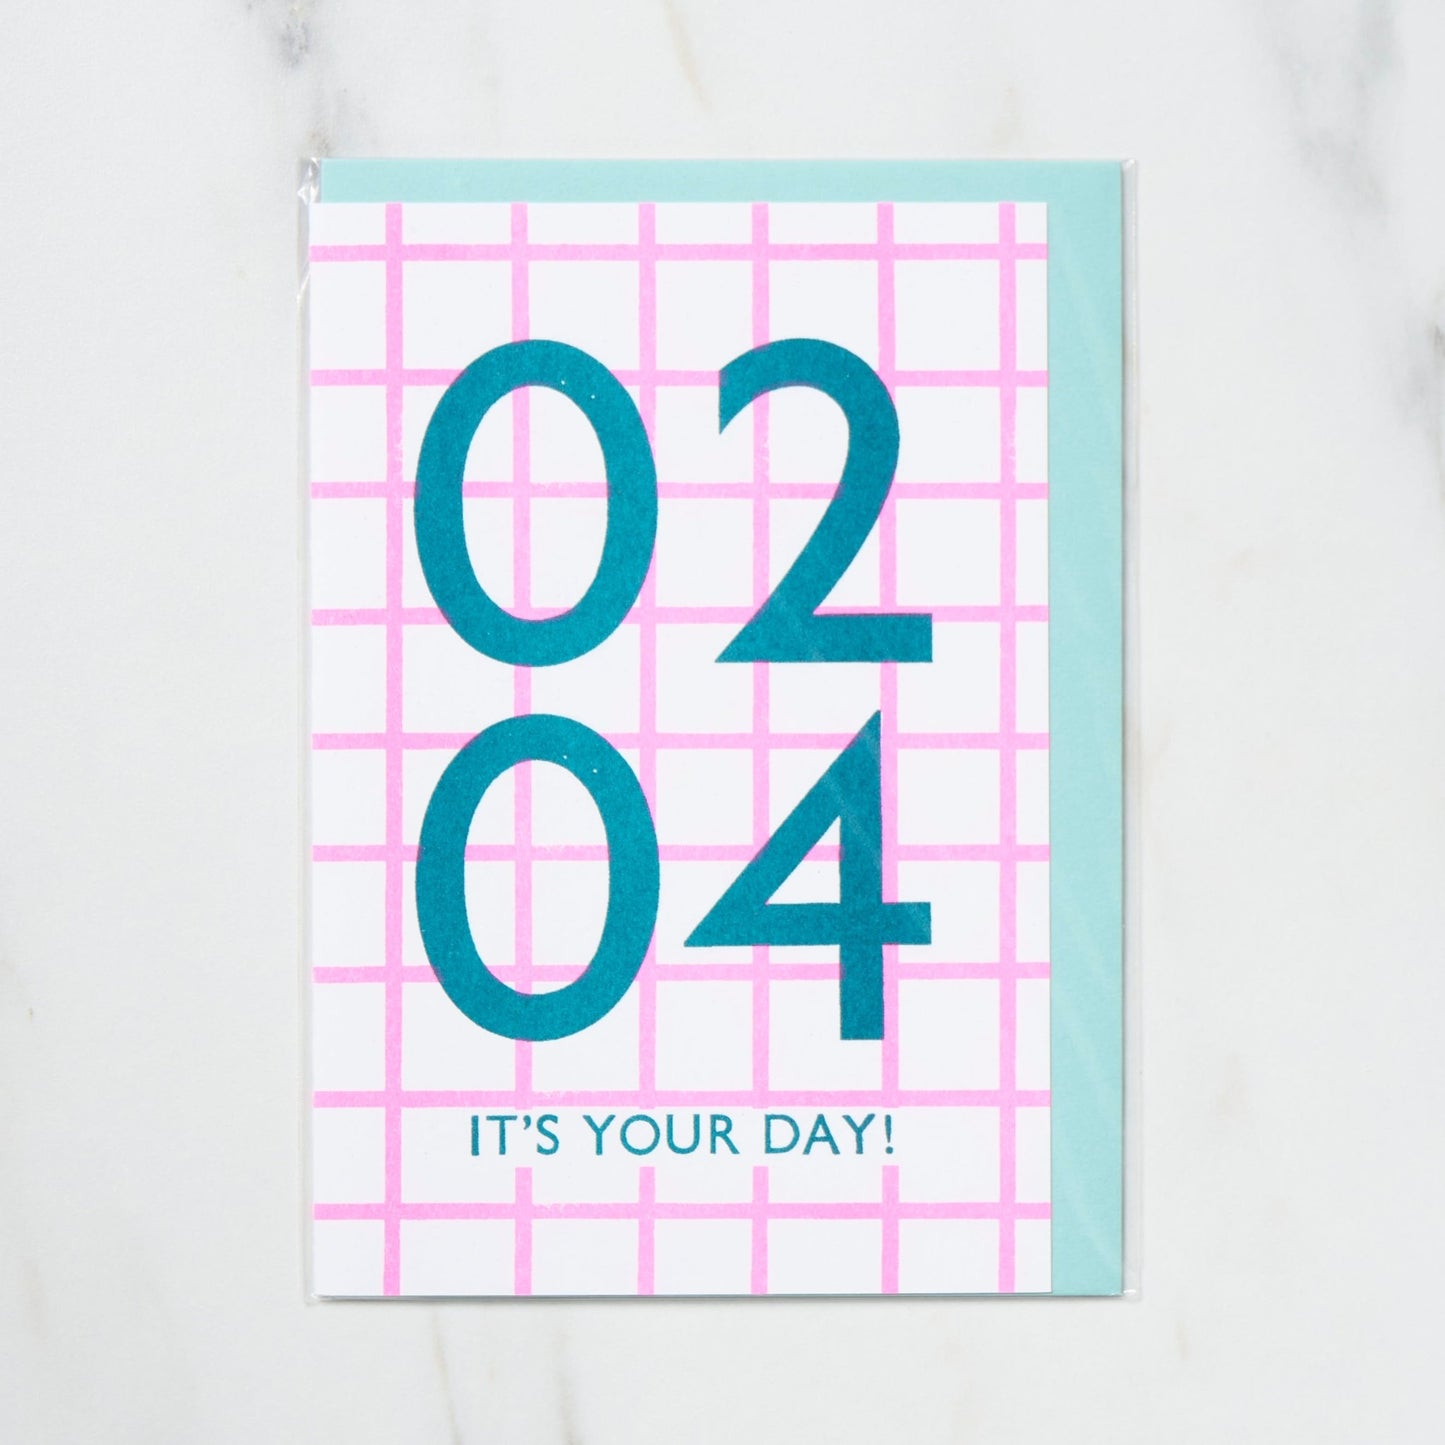 365 Find Your Day Card FEBRUARY / Letterpress Letter